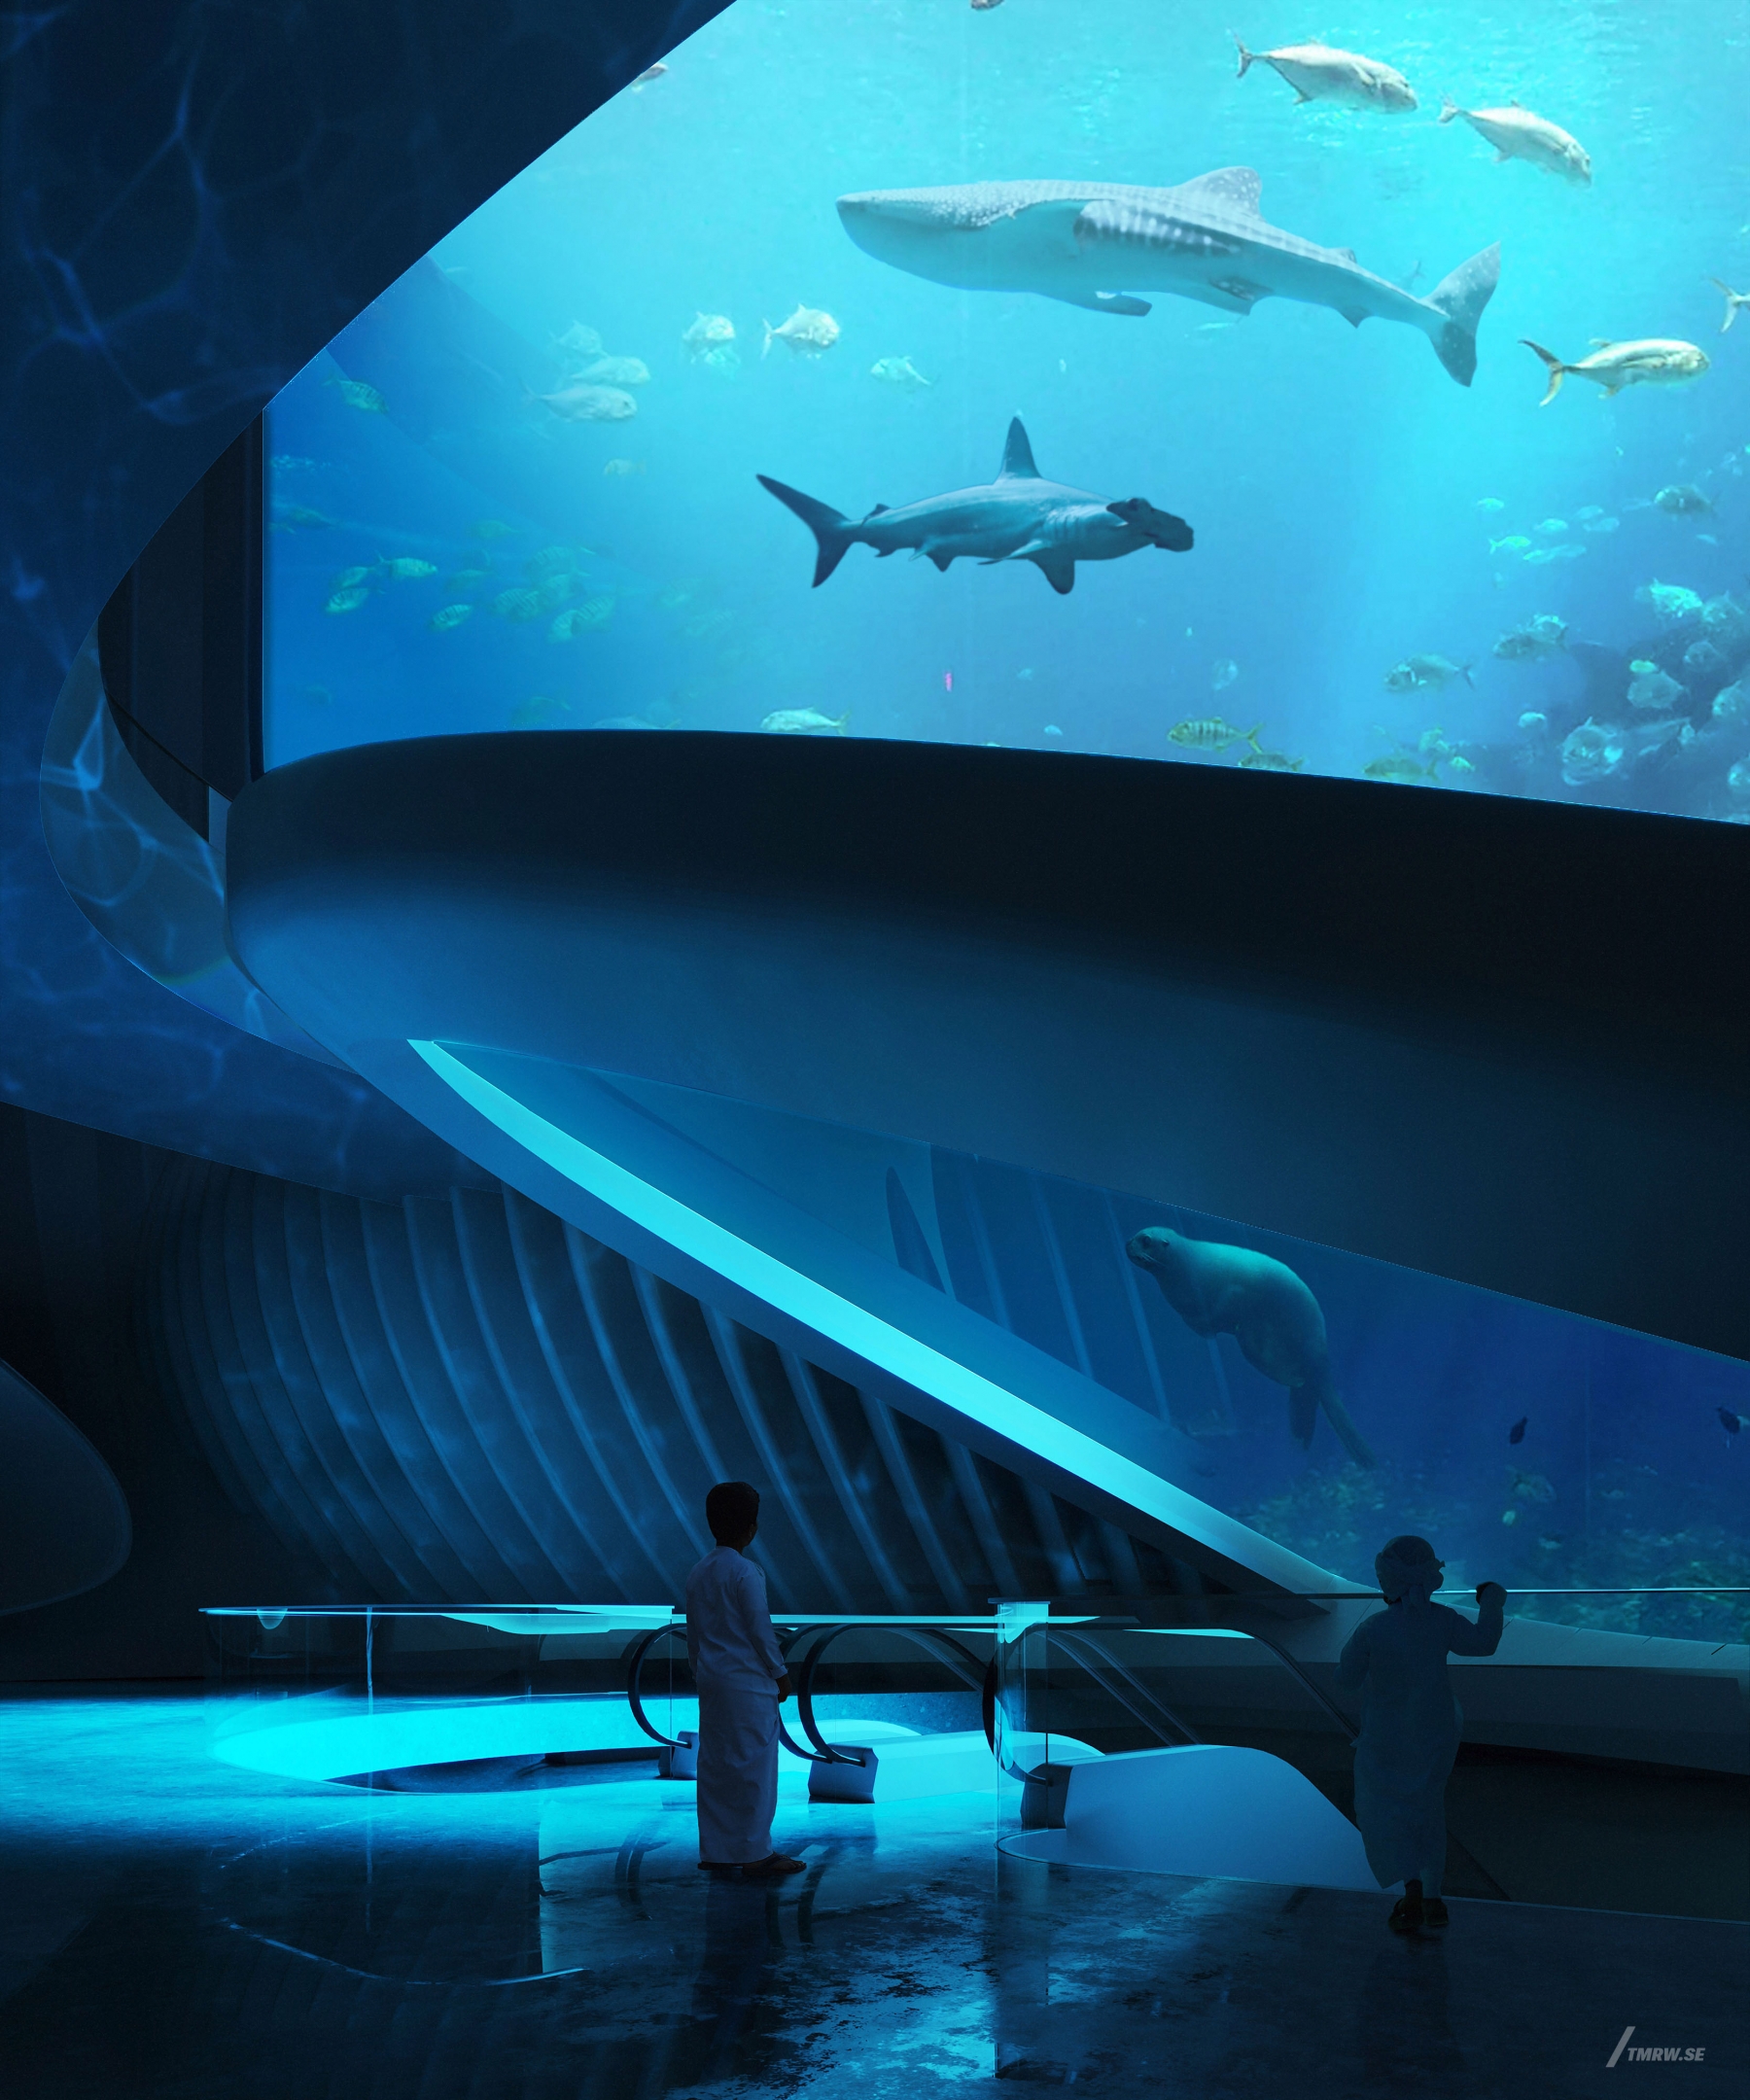 Architectural visualization of Raha for HKS. An image of a underwater aquarium with people watching the fishes in daylight from street view.